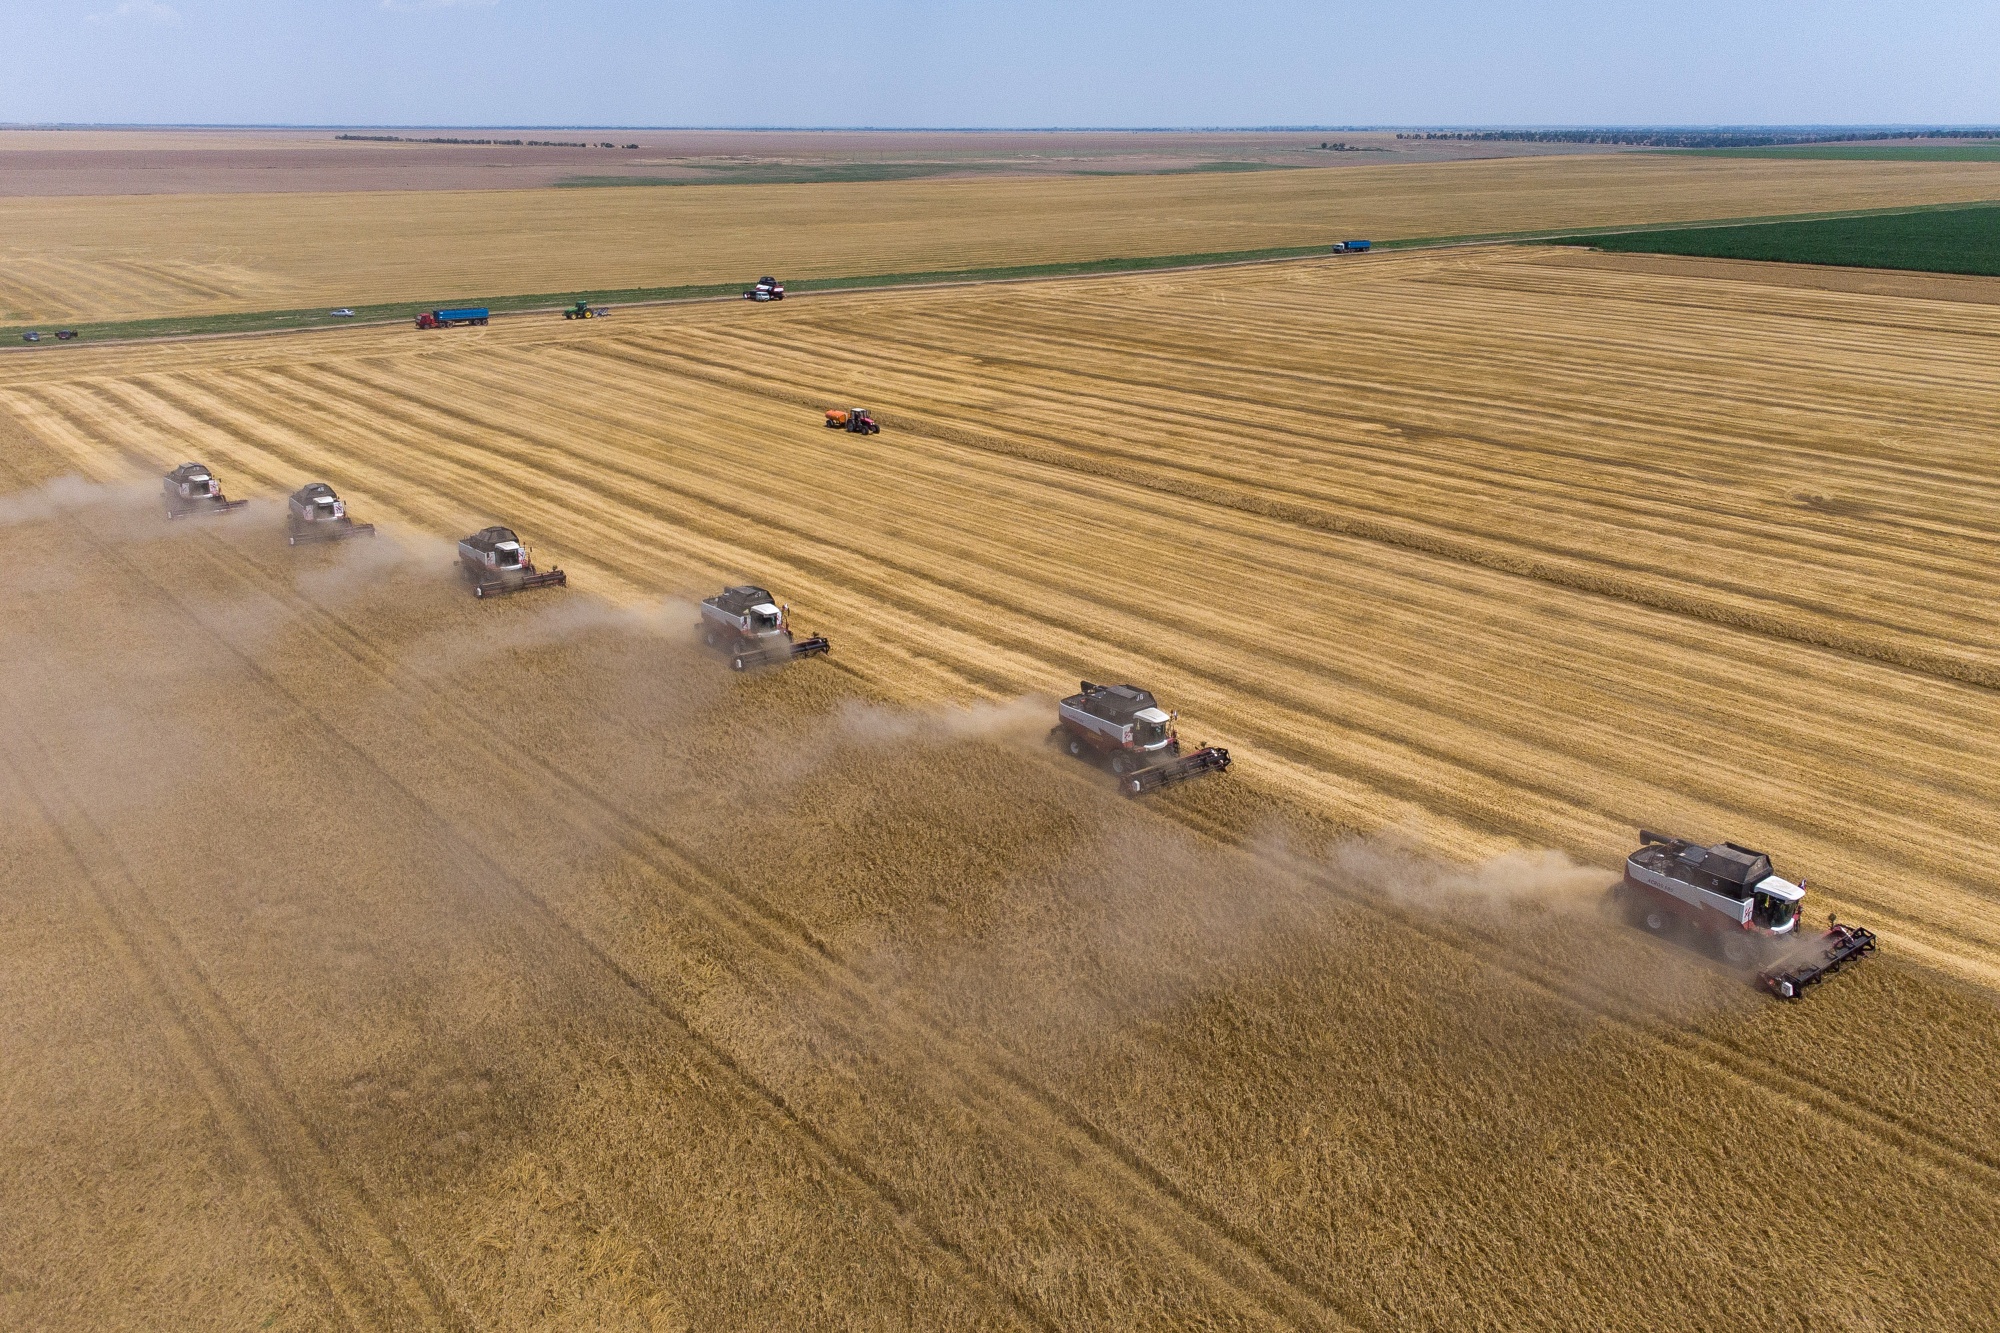 Russian wheat&nbsp;exports continue —&nbsp;at higher prices —&nbsp;as sanctions on Russian agriculture aren't even being discussed because the world needs its grain.&nbsp;